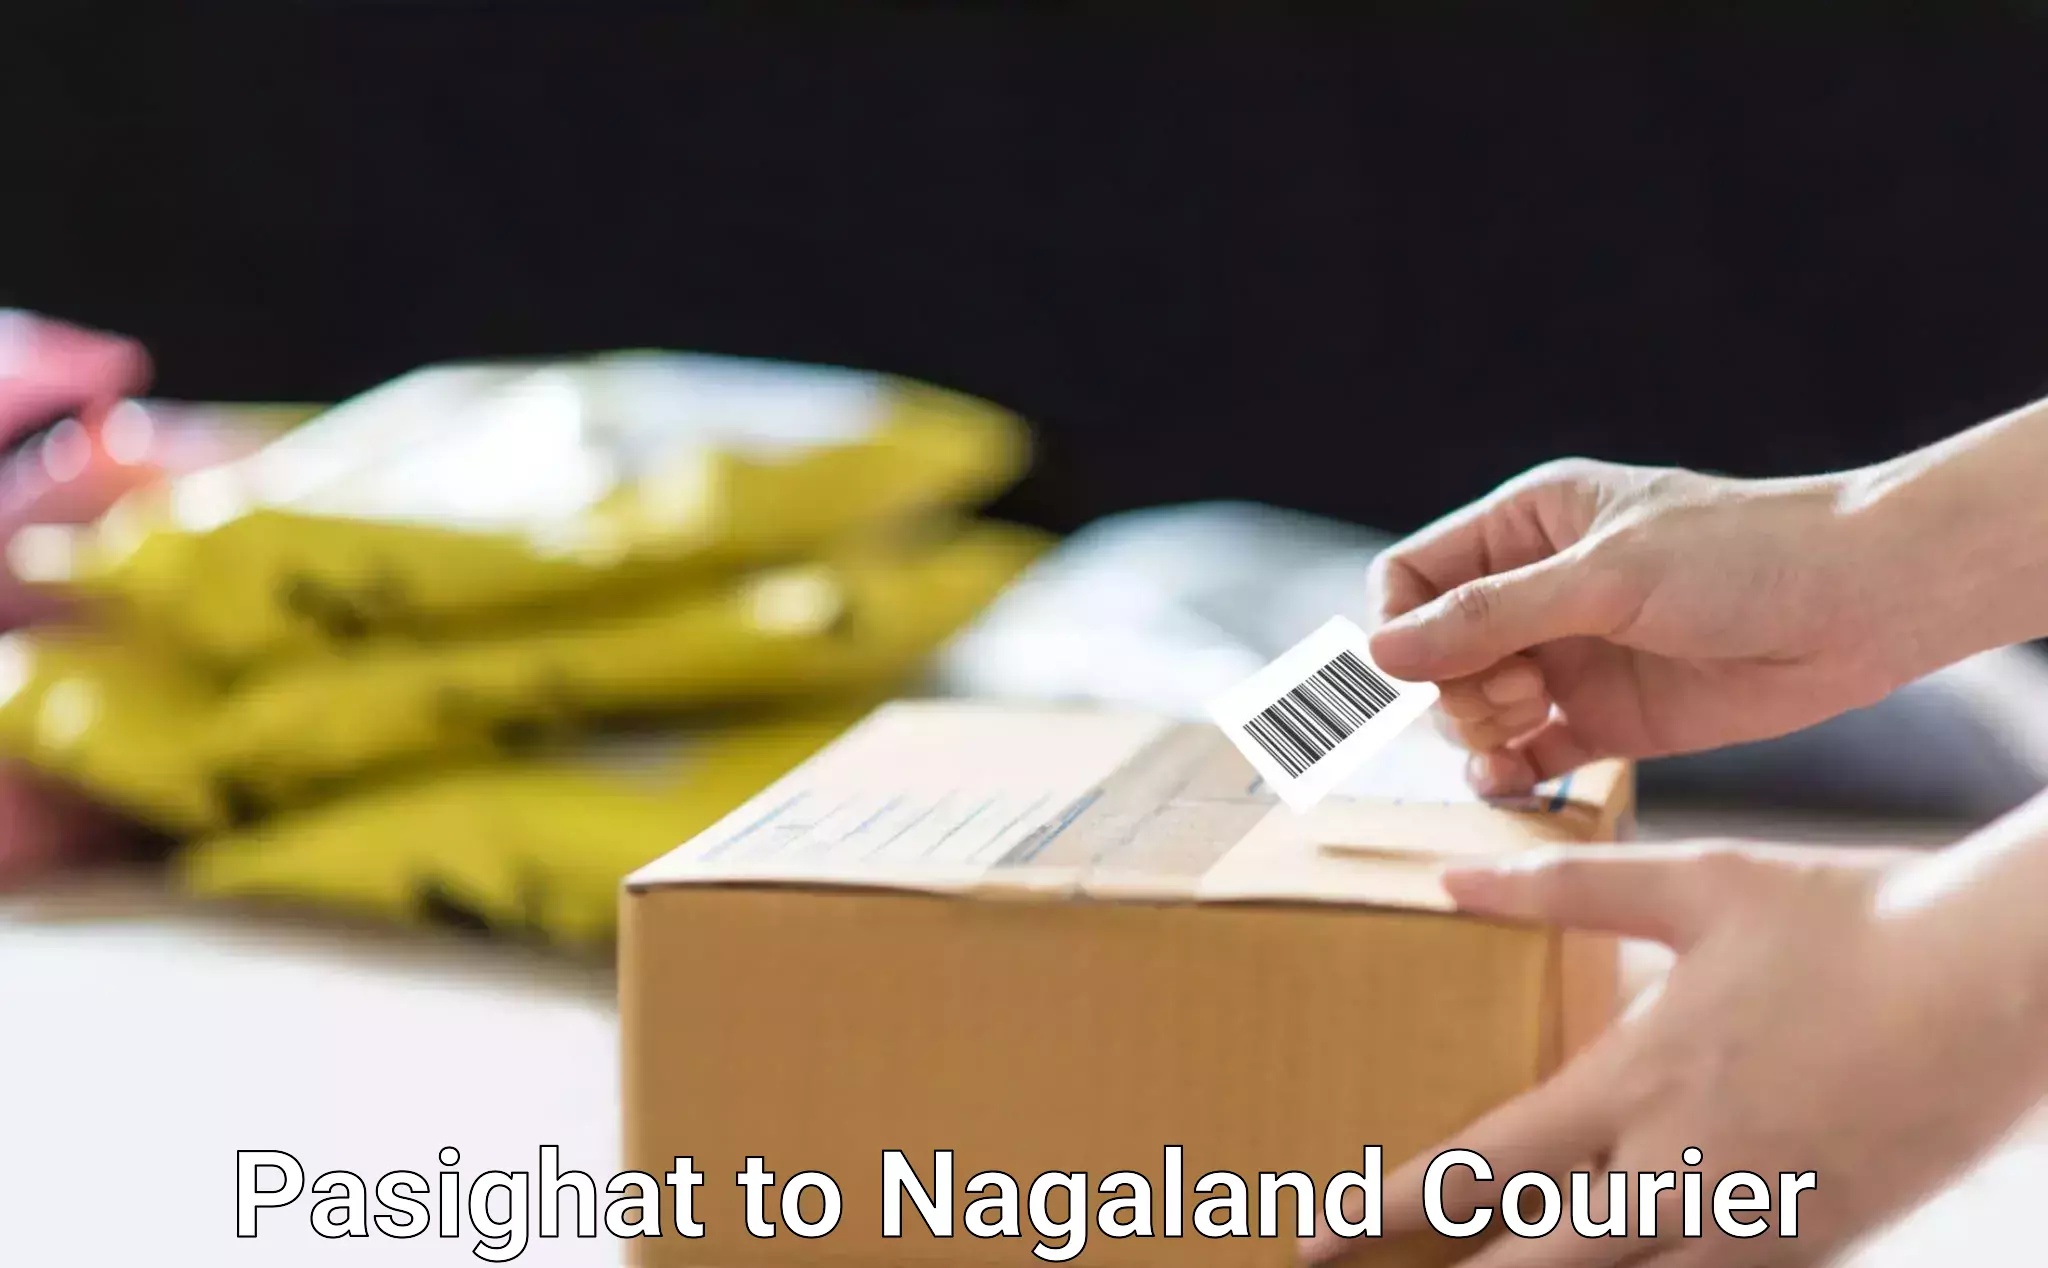 Courier service partnerships Pasighat to Nagaland